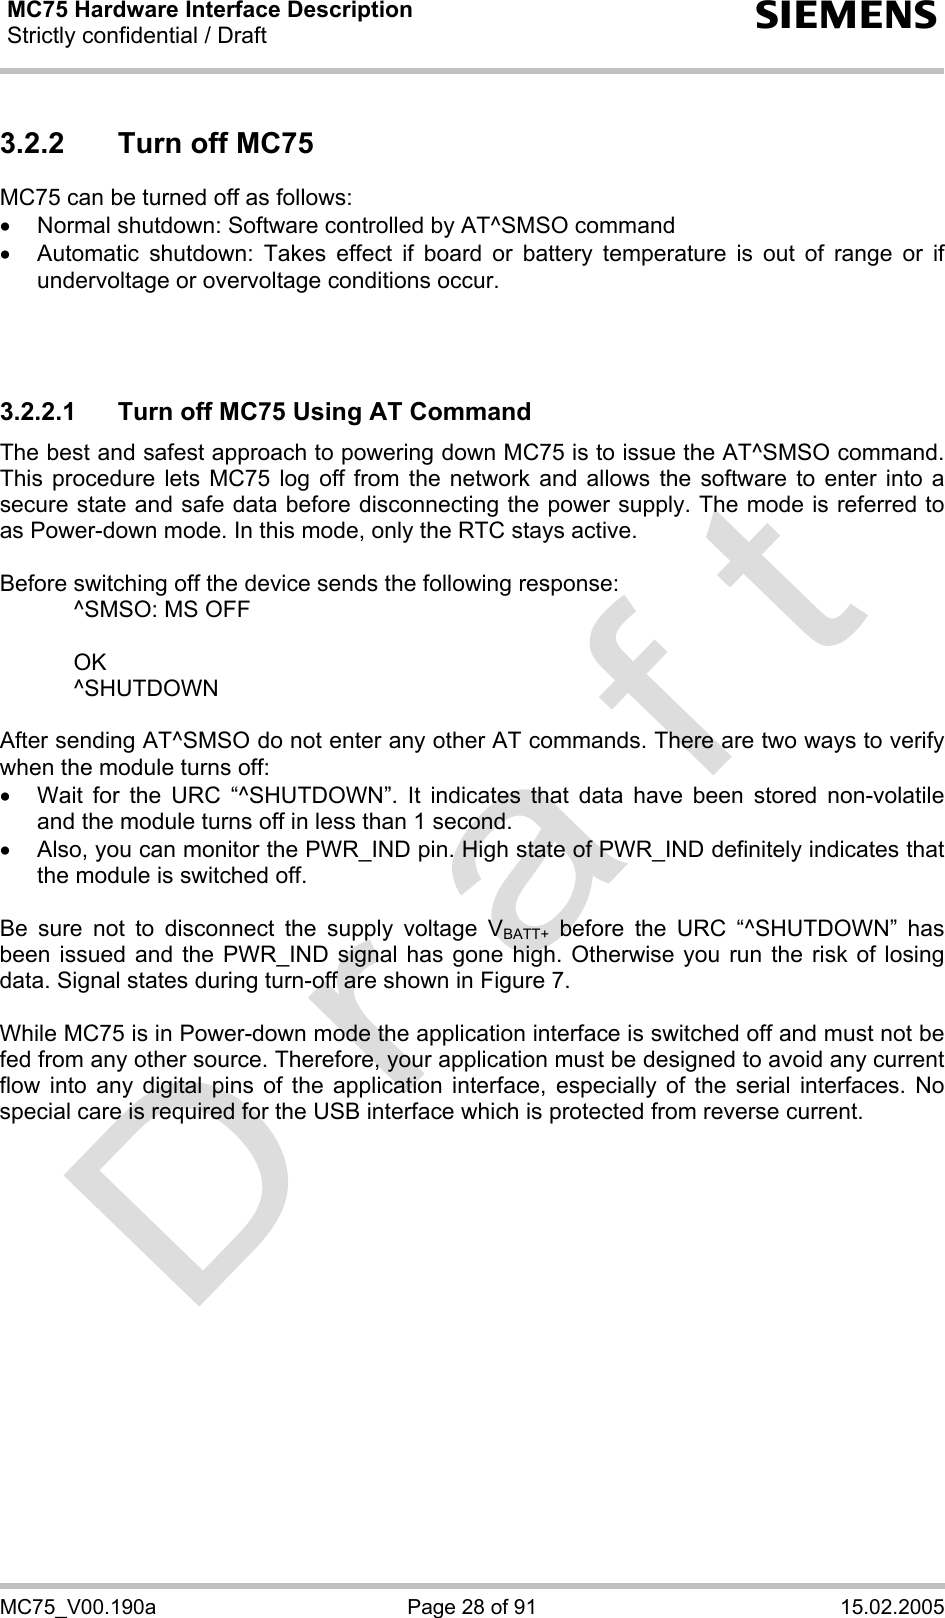 MC75 Hardware Interface Description Strictly confidential / Draft  s MC75_V00.190a  Page 28 of 91  15.02.2005 3.2.2  Turn off MC75 MC75 can be turned off as follows: •  Normal shutdown: Software controlled by AT^SMSO command •  Automatic shutdown: Takes effect if board or battery temperature is out of range or if undervoltage or overvoltage conditions occur.    3.2.2.1  Turn off MC75 Using AT Command The best and safest approach to powering down MC75 is to issue the AT^SMSO command. This procedure lets MC75 log off from the network and allows the software to enter into a secure state and safe data before disconnecting the power supply. The mode is referred to as Power-down mode. In this mode, only the RTC stays active.  Before switching off the device sends the following response:     ^SMSO: MS OFF    OK   ^SHUTDOWN  After sending AT^SMSO do not enter any other AT commands. There are two ways to verify when the module turns off:  •  Wait for the URC “^SHUTDOWN”. It indicates that data have been stored non-volatile and the module turns off in less than 1 second. •  Also, you can monitor the PWR_IND pin. High state of PWR_IND definitely indicates that the module is switched off.  Be sure not to disconnect the supply voltage VBATT+ before the URC “^SHUTDOWN” has been issued and the PWR_IND signal has gone high. Otherwise you run the risk of losing data. Signal states during turn-off are shown in Figure 7.  While MC75 is in Power-down mode the application interface is switched off and must not be fed from any other source. Therefore, your application must be designed to avoid any current flow into any digital pins of the application interface, especially of the serial interfaces. No special care is required for the USB interface which is protected from reverse current.   